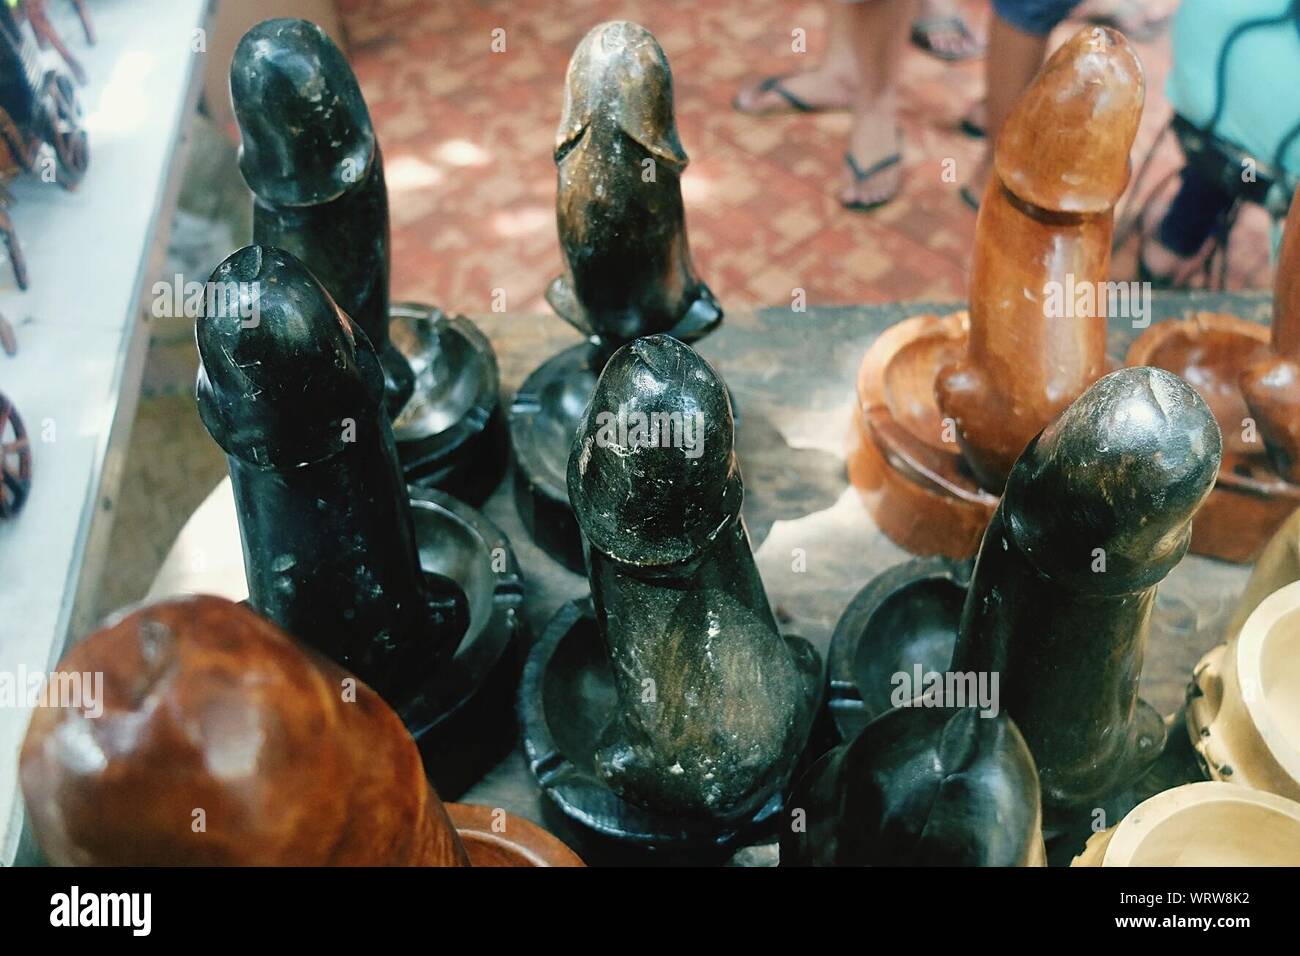 Close-up Of Phallus Shape Wooden Art For Sale On Table Stock Photo